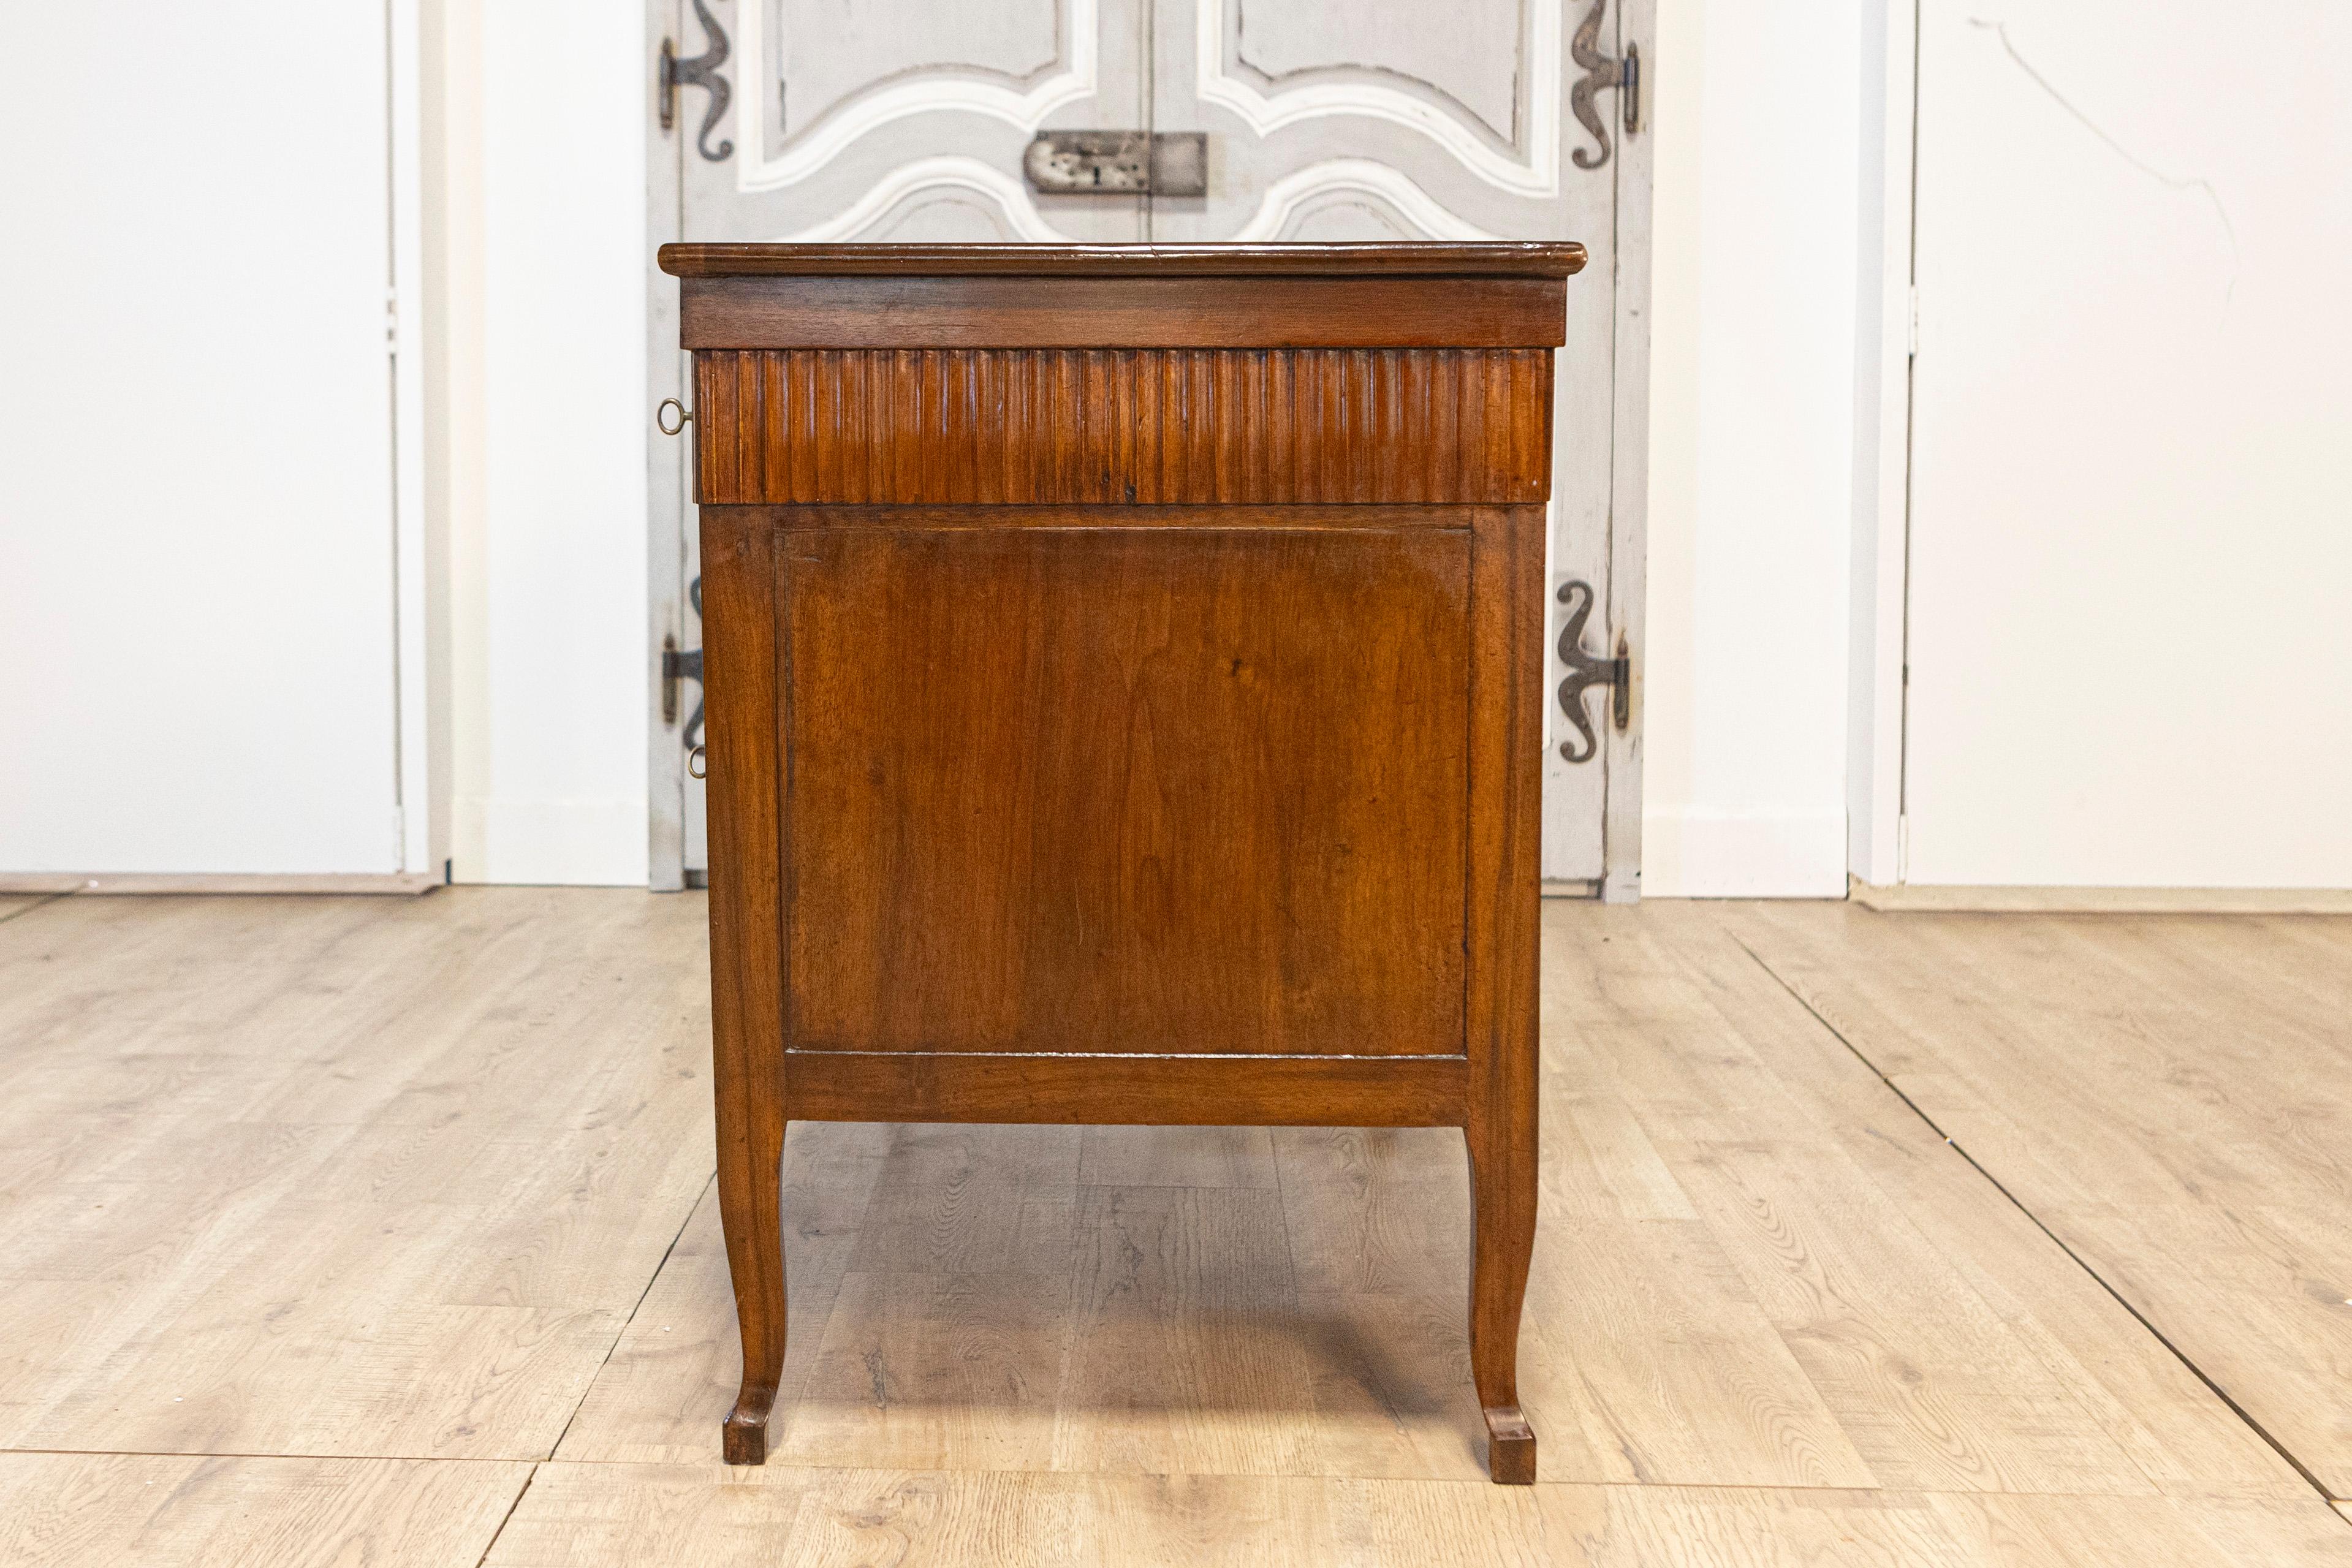 Italian 18th Century Walnut Desk with Carved Reeded Apron, Drawers and Doors For Sale 5